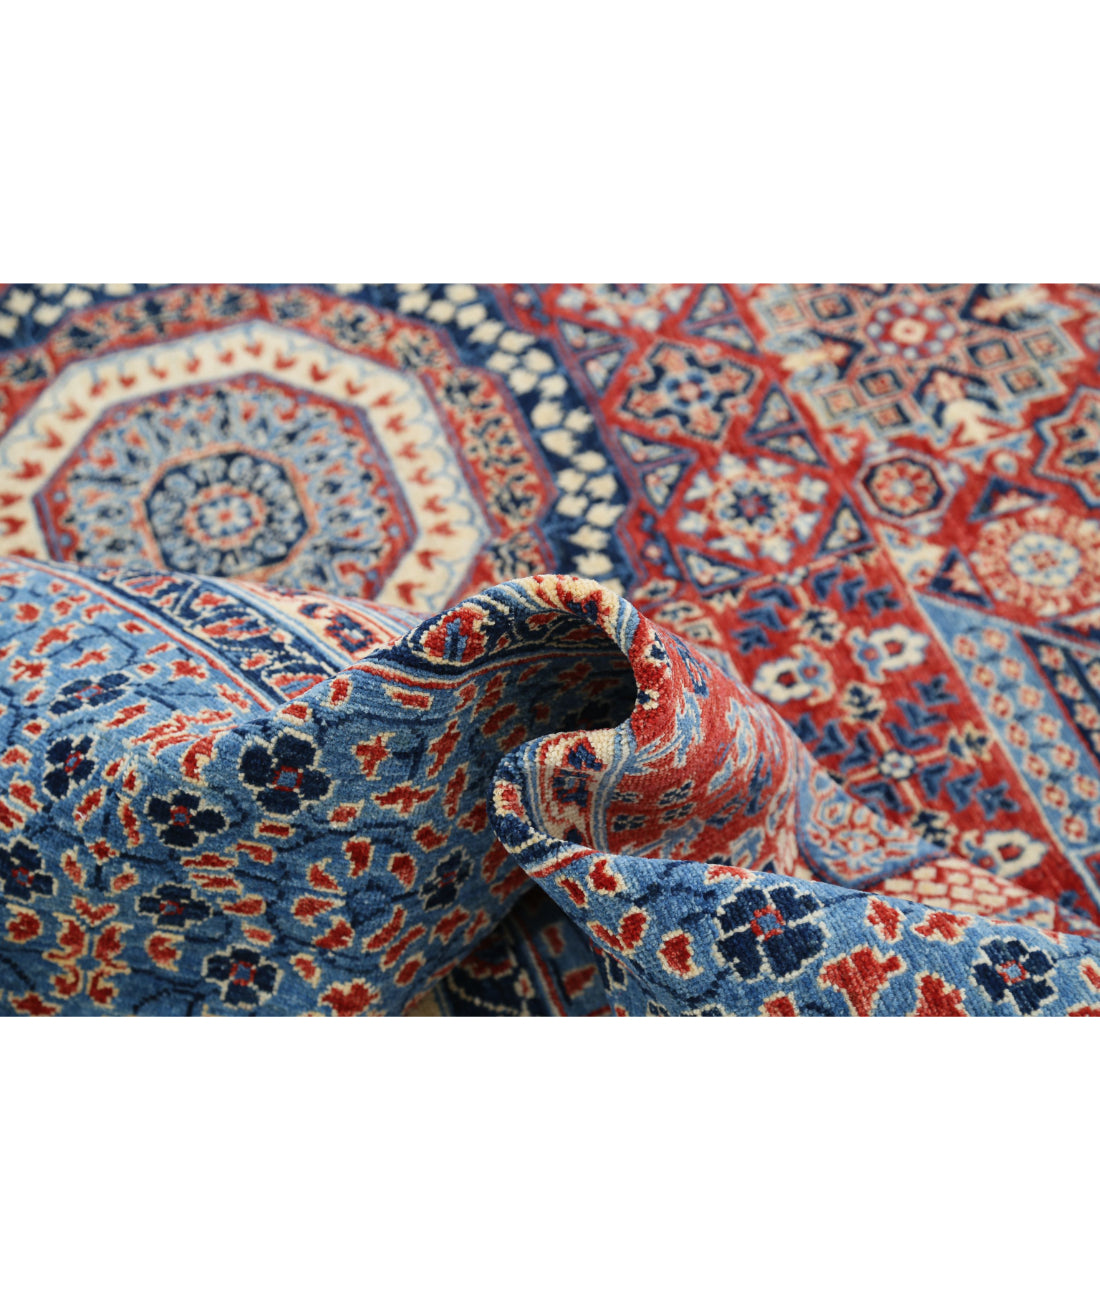 Mamluk 10'1'' X 13'8'' Hand-Knotted Wool Rug 10'1'' x 13'8'' (303 X 410) / Red / Blue